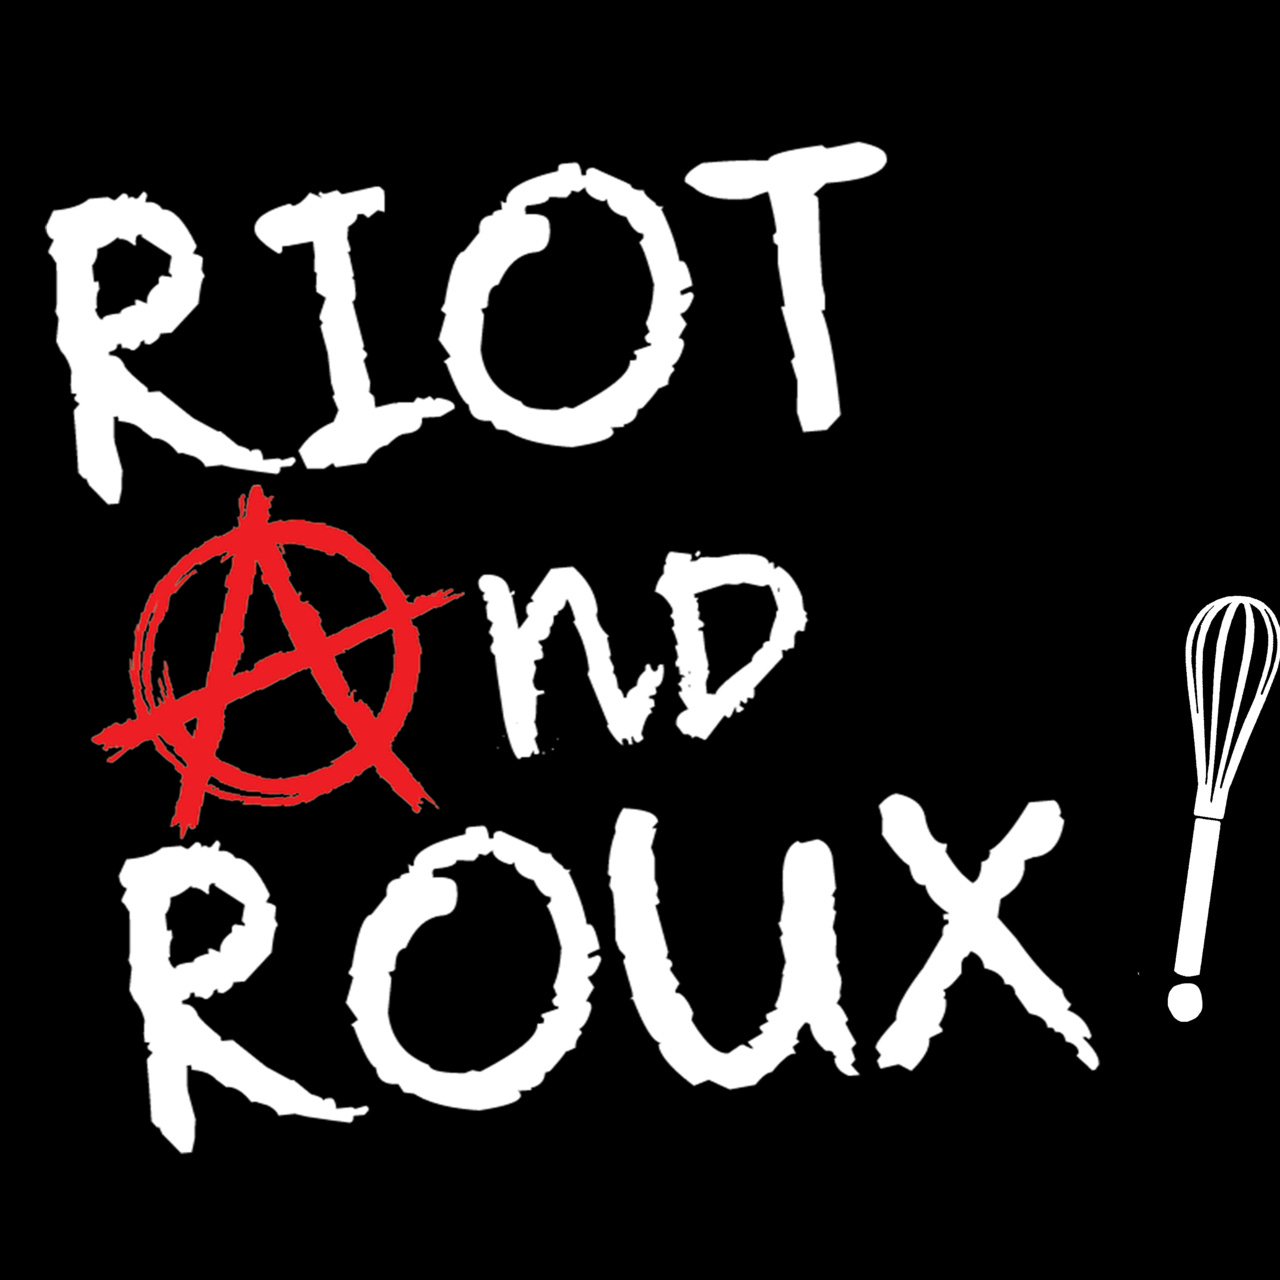 Riot and Roux!